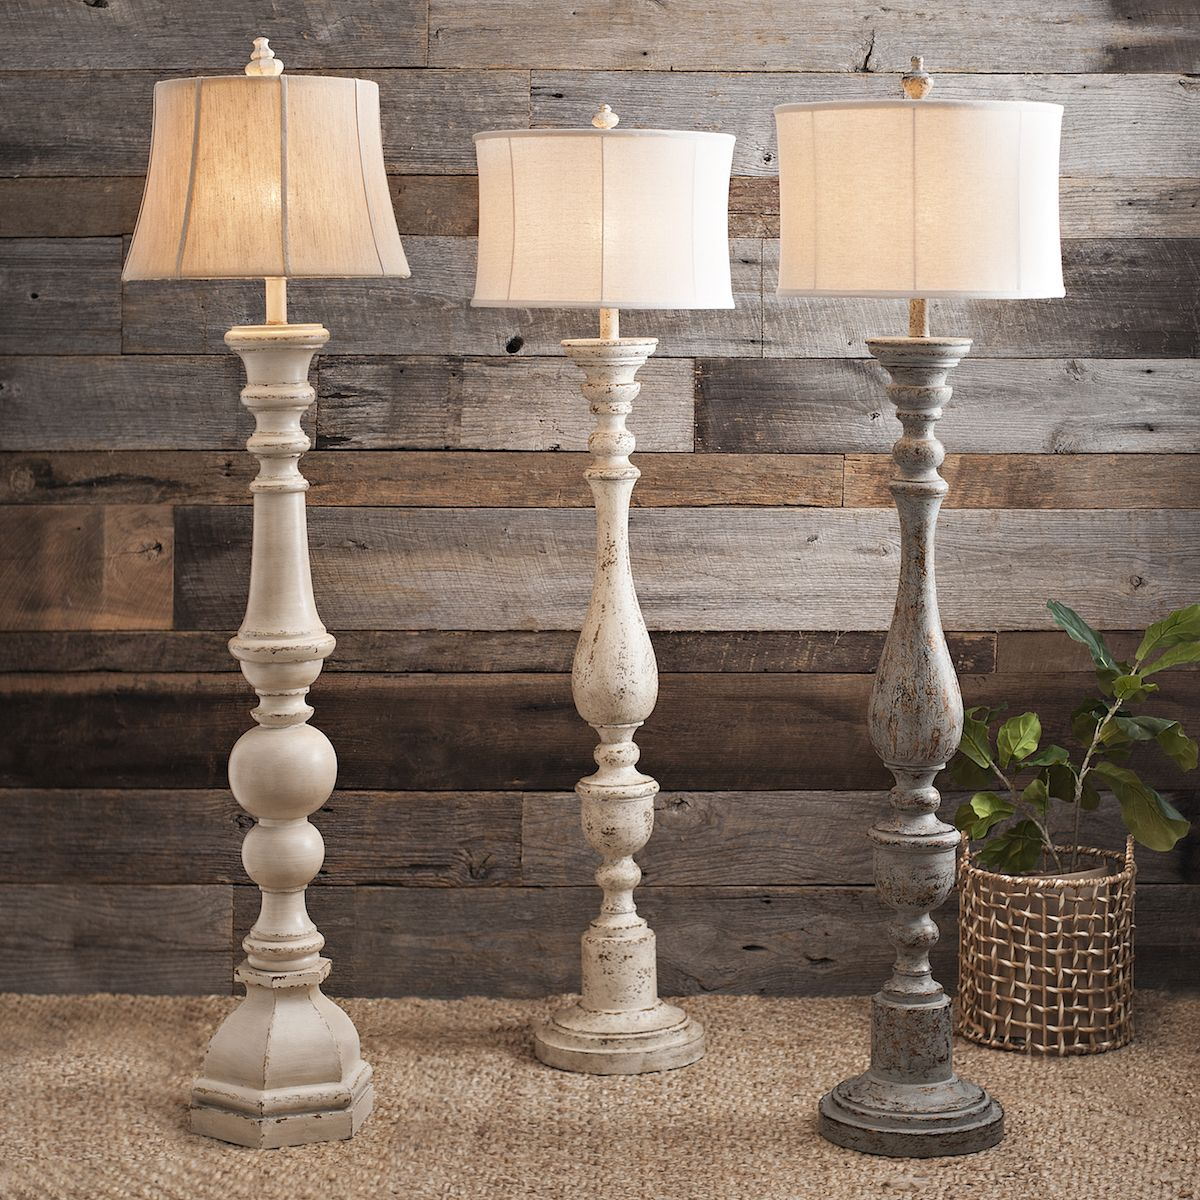 Product Details Distressed Cream Spindle Floor Lamp In 2019 for size 1200 X 1200